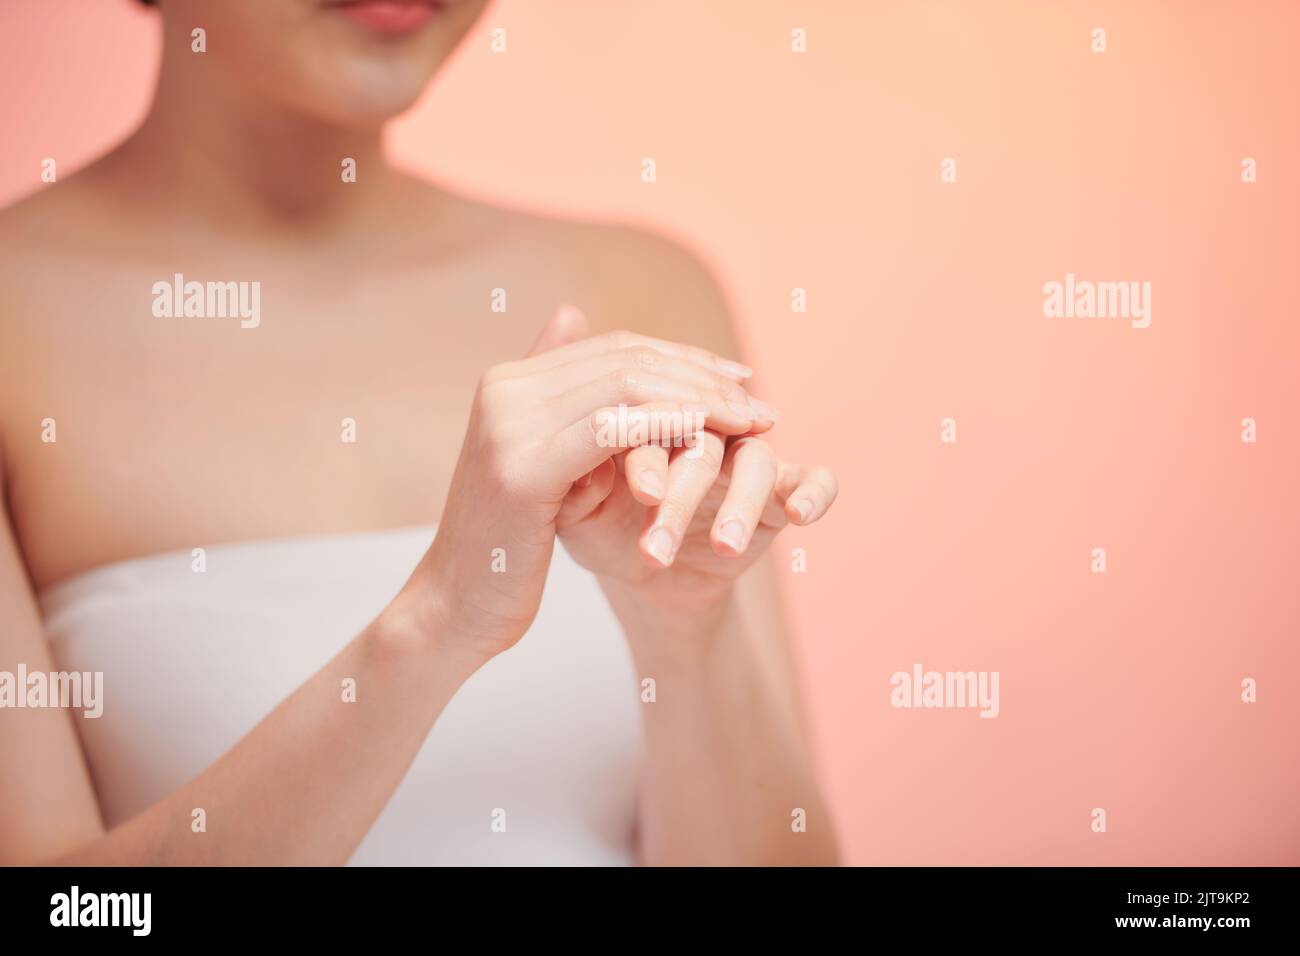 Smiling young woman applies cream on her hands. Stock Photo